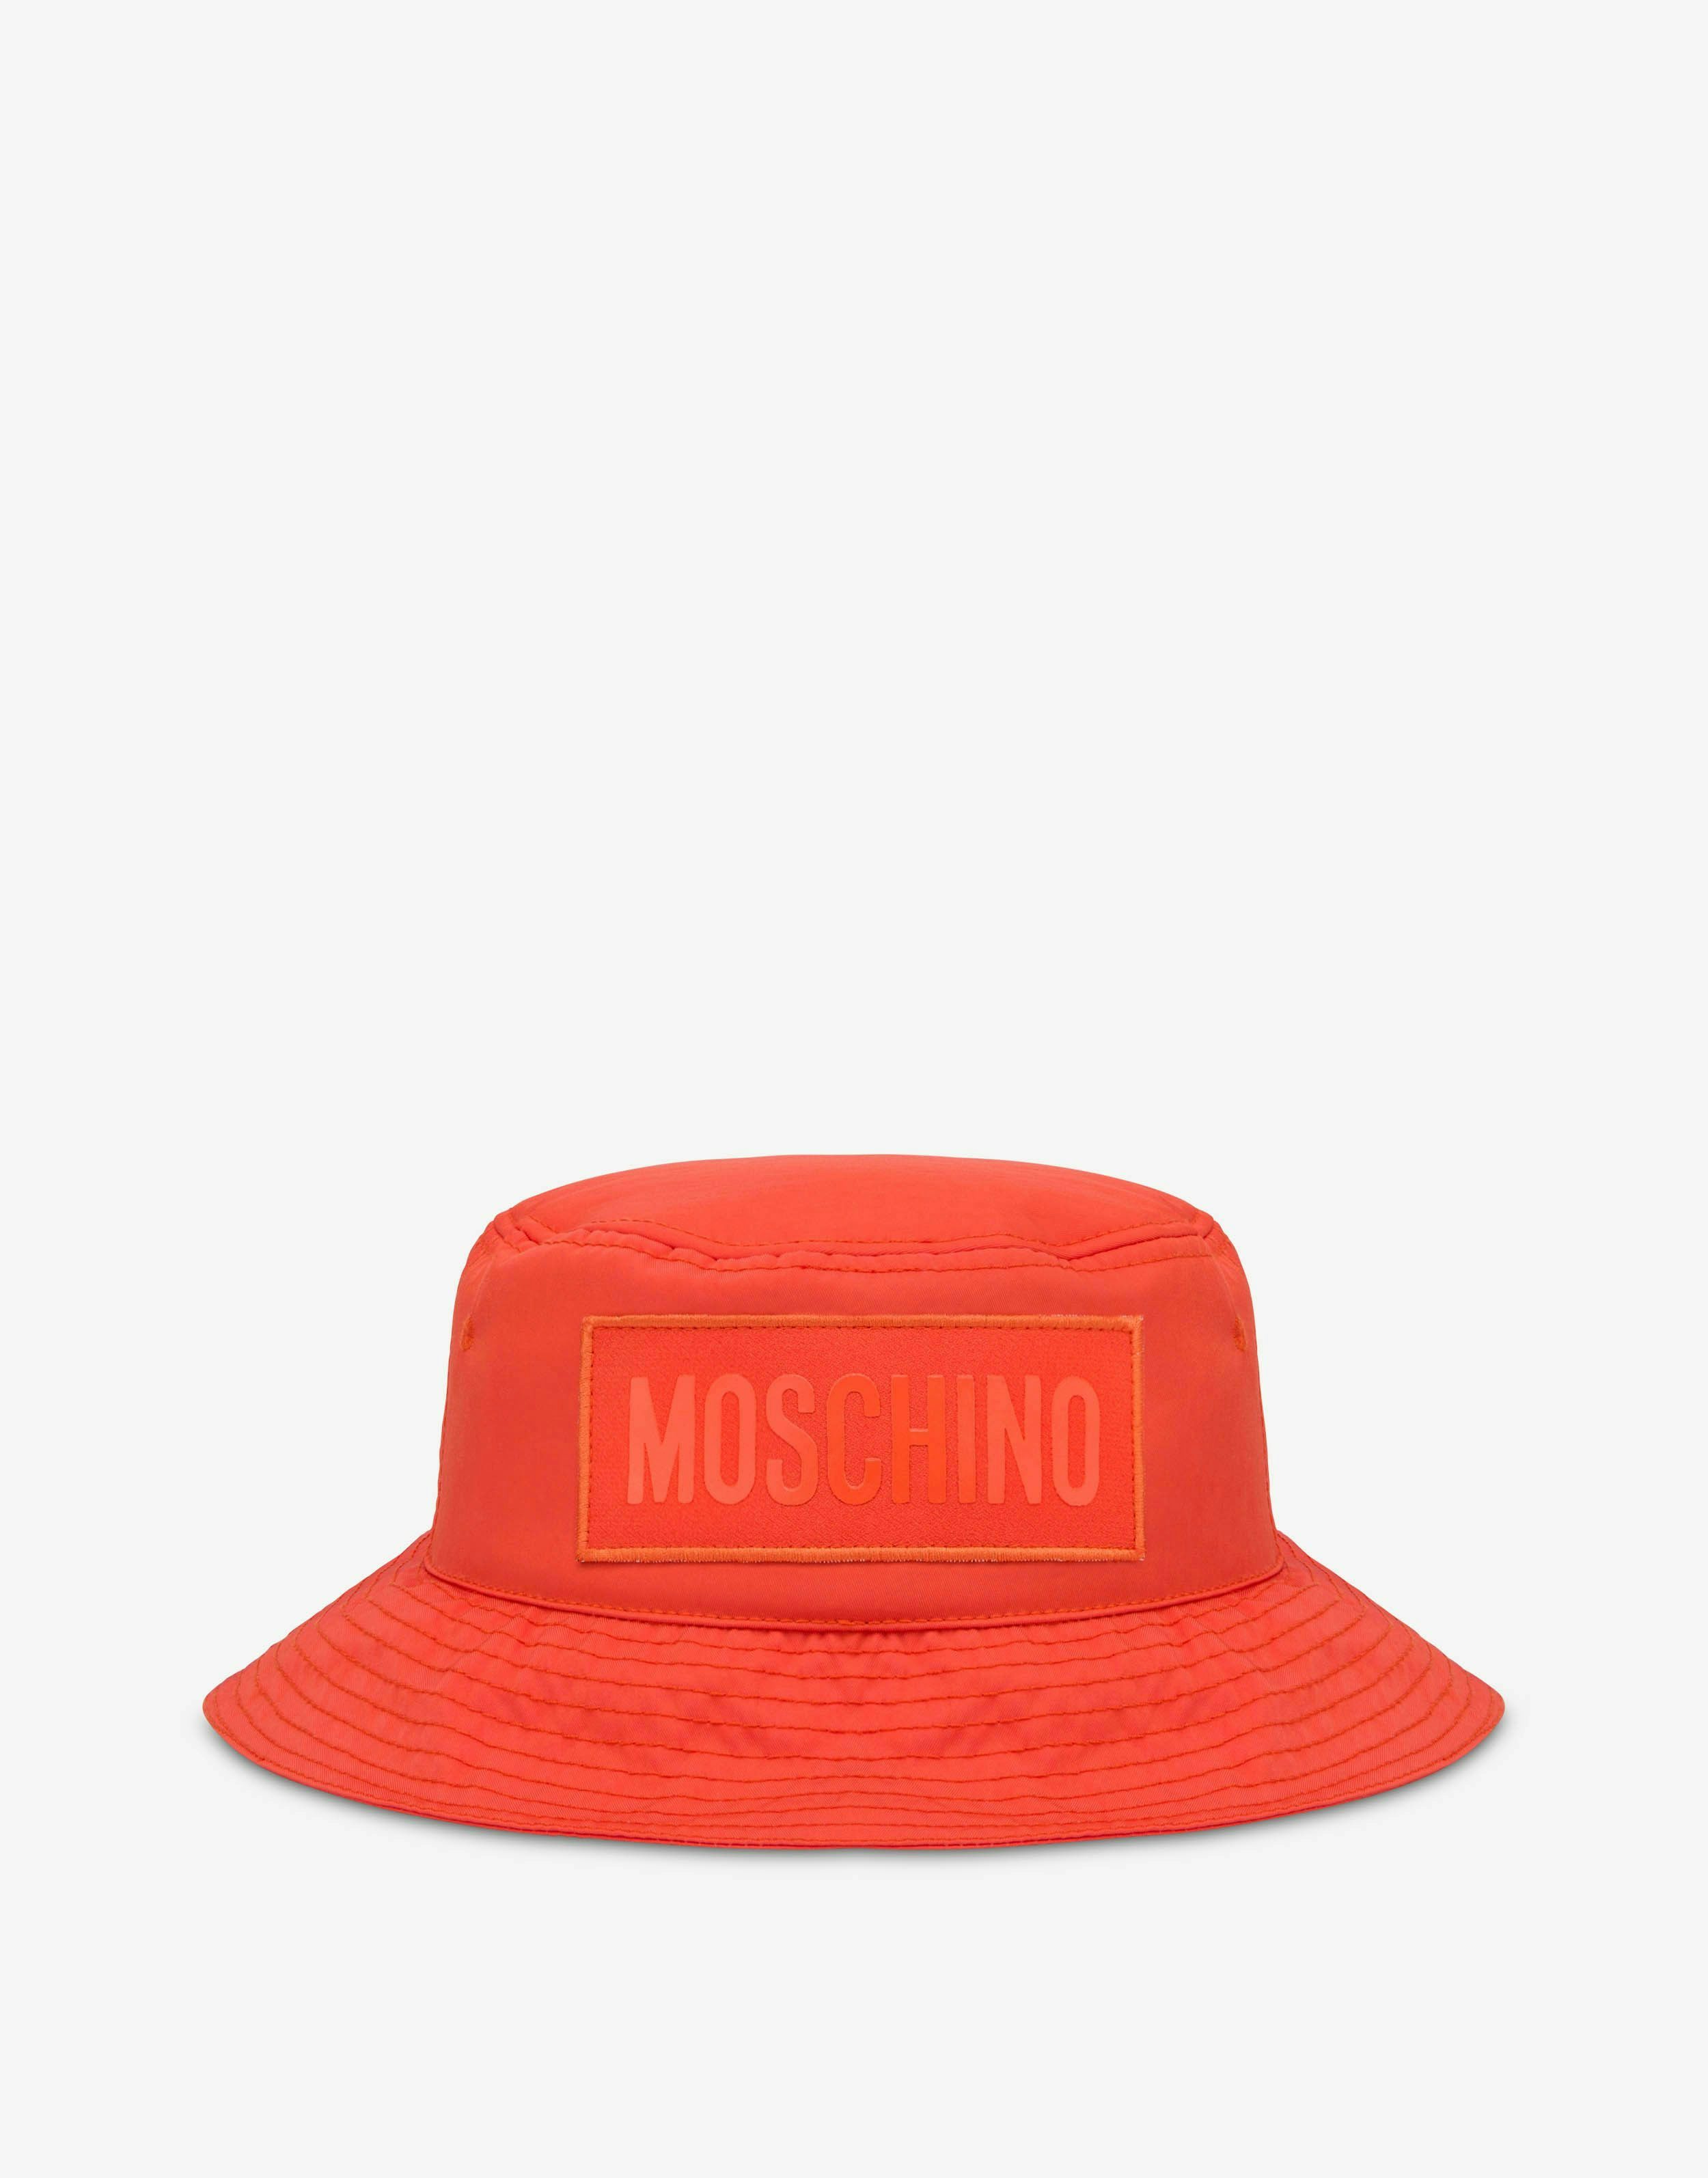 Moschino Hats & Gloves - Men Accessories | Moschino Official Store